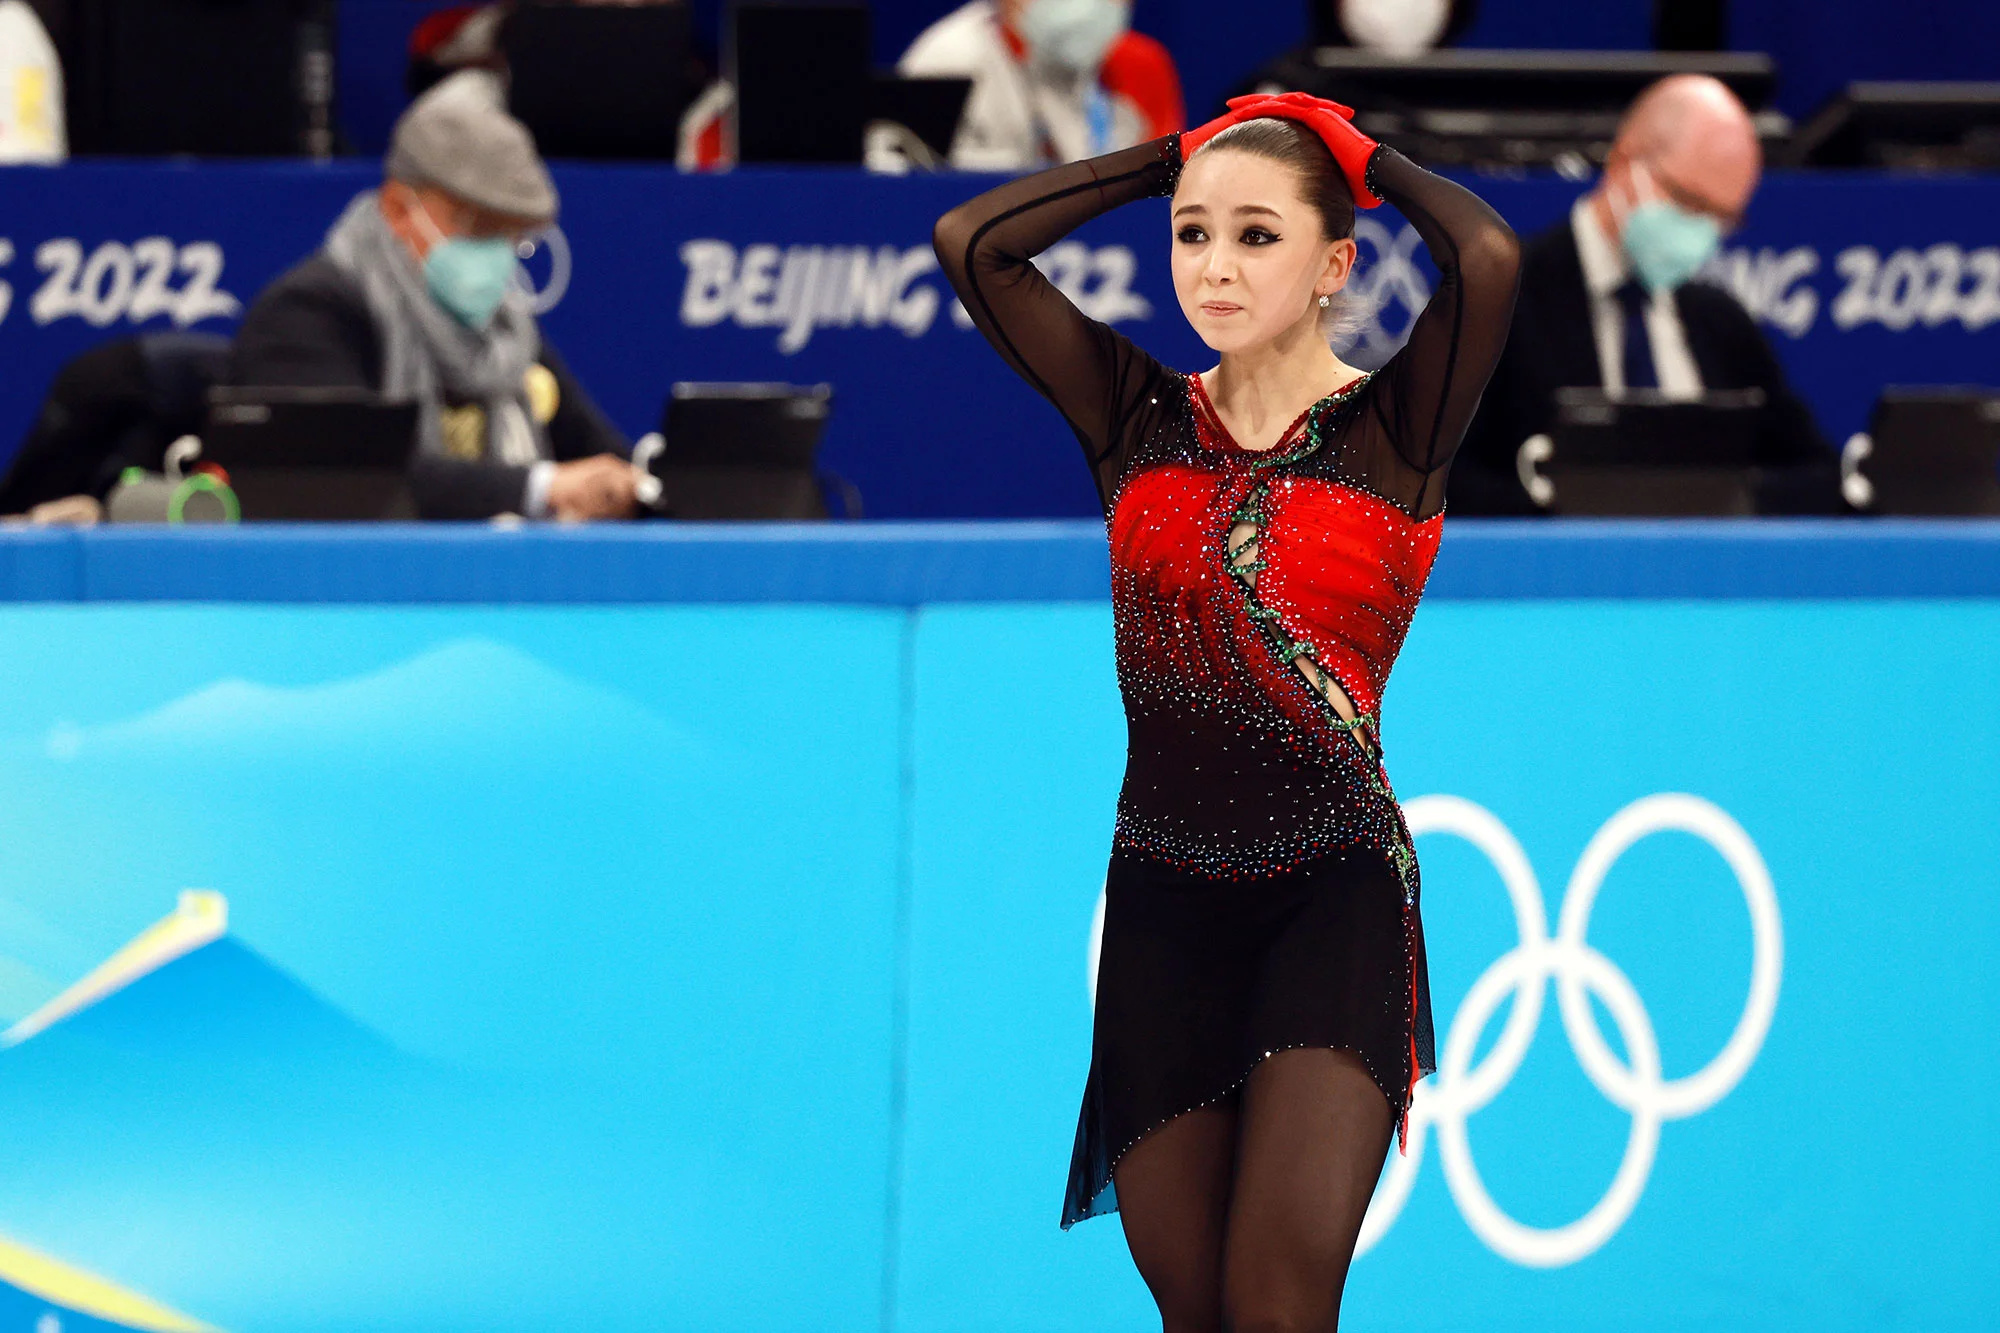 Single Skating: Kamila Valieva, The current world record holder for the women's short program, freestyle and total scores. 2000x1340 HD Wallpaper.